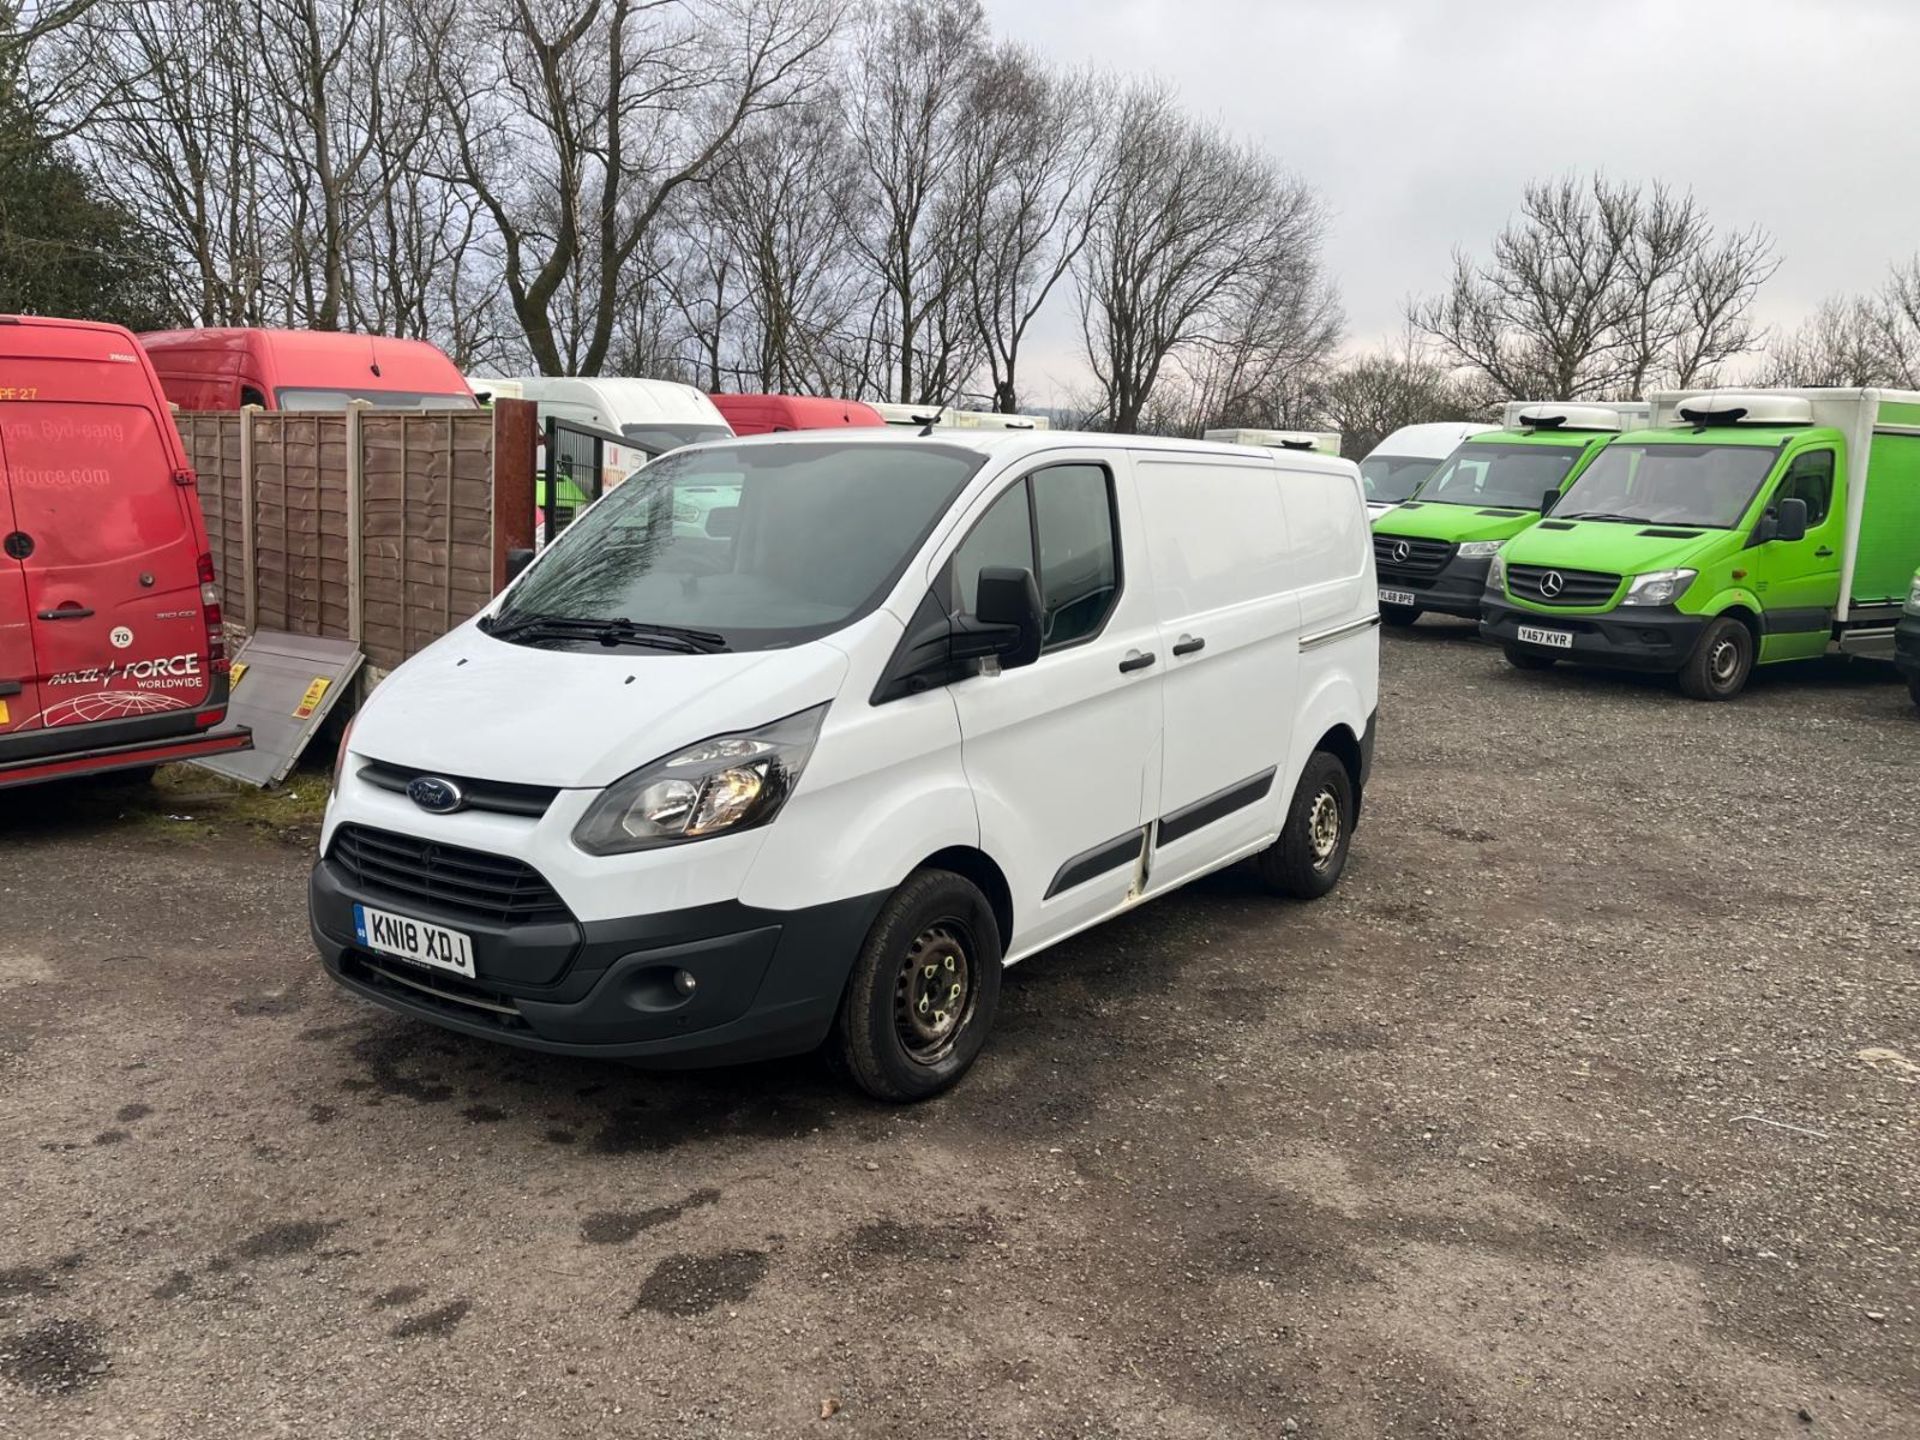 2018 FORD TRANSIT CUSTOM TDCI 130 L1 H1 SWB PANEL VAN - RELIABLE AND EFFICIENT BUSINESS COMPANION